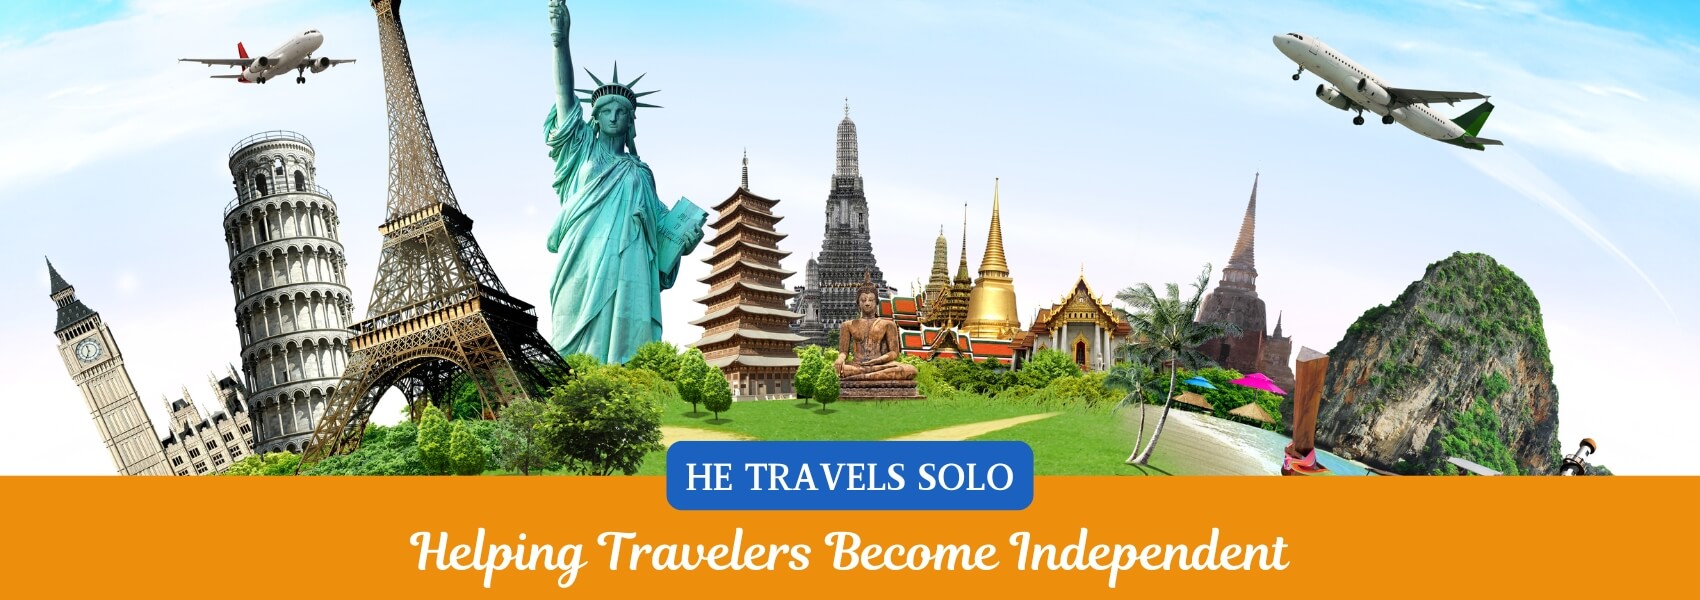 He Travels Solo - Homepage